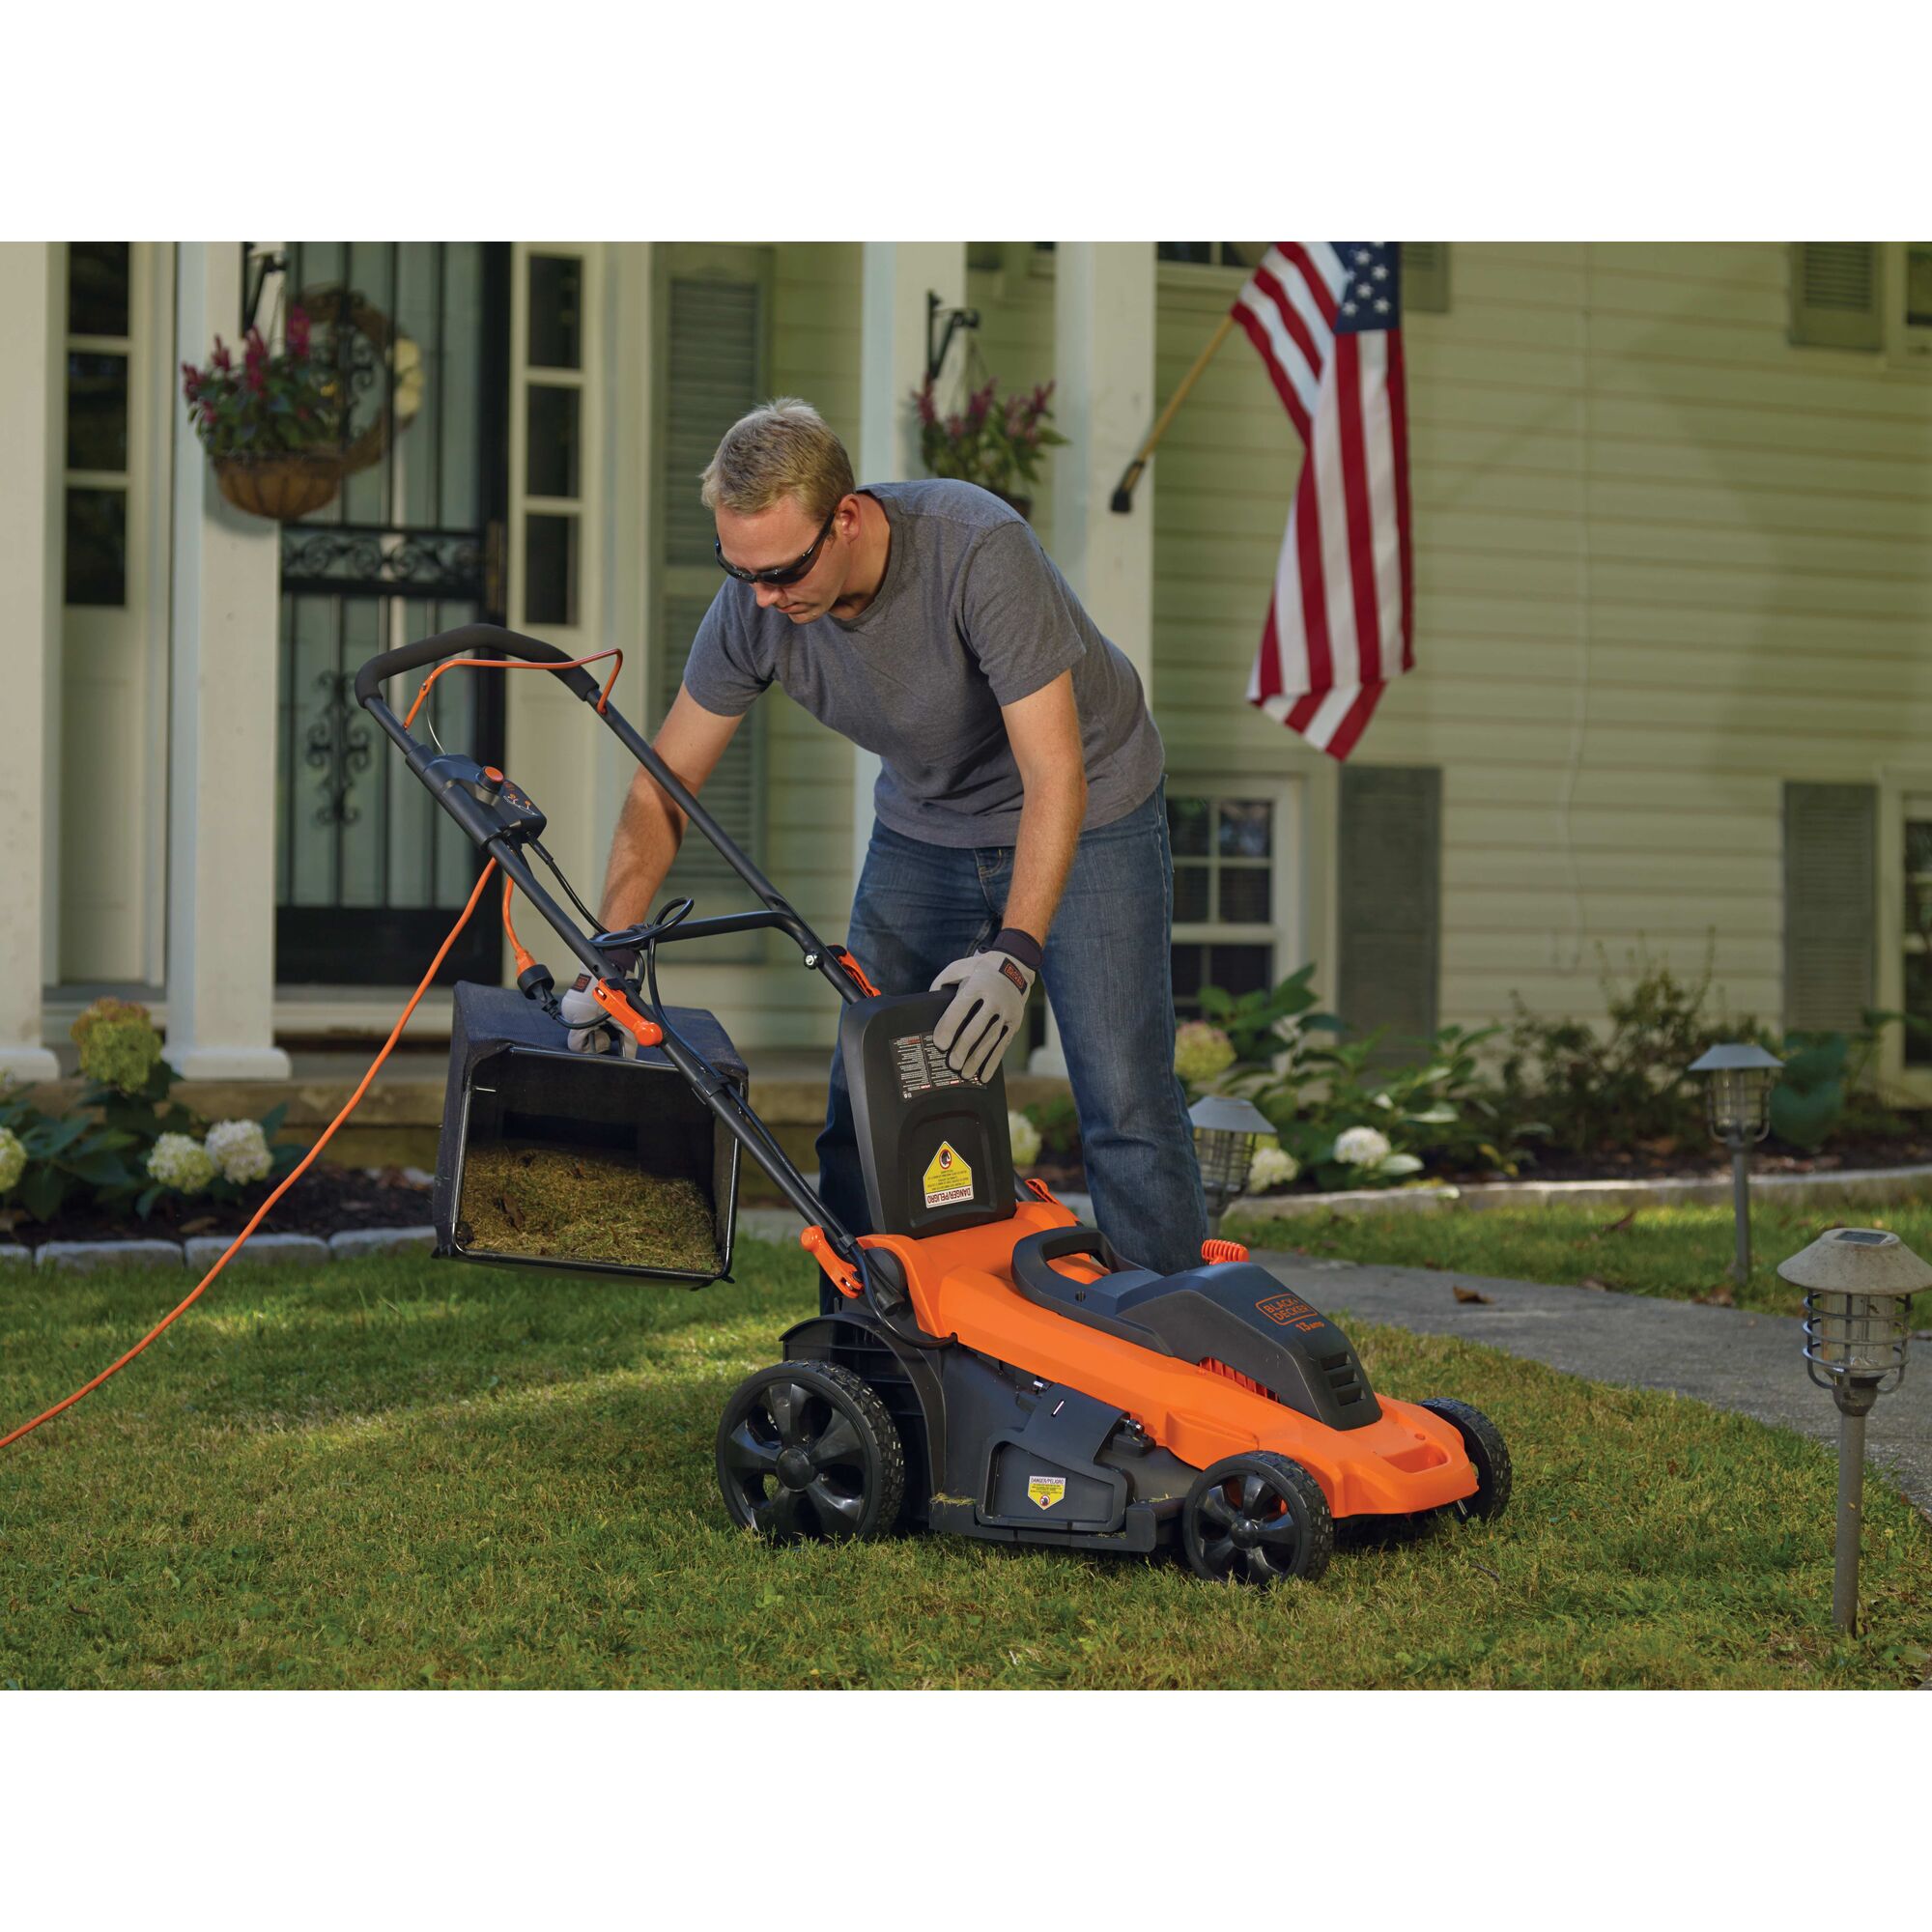 Man removing waste from Corded Lawn Mower.